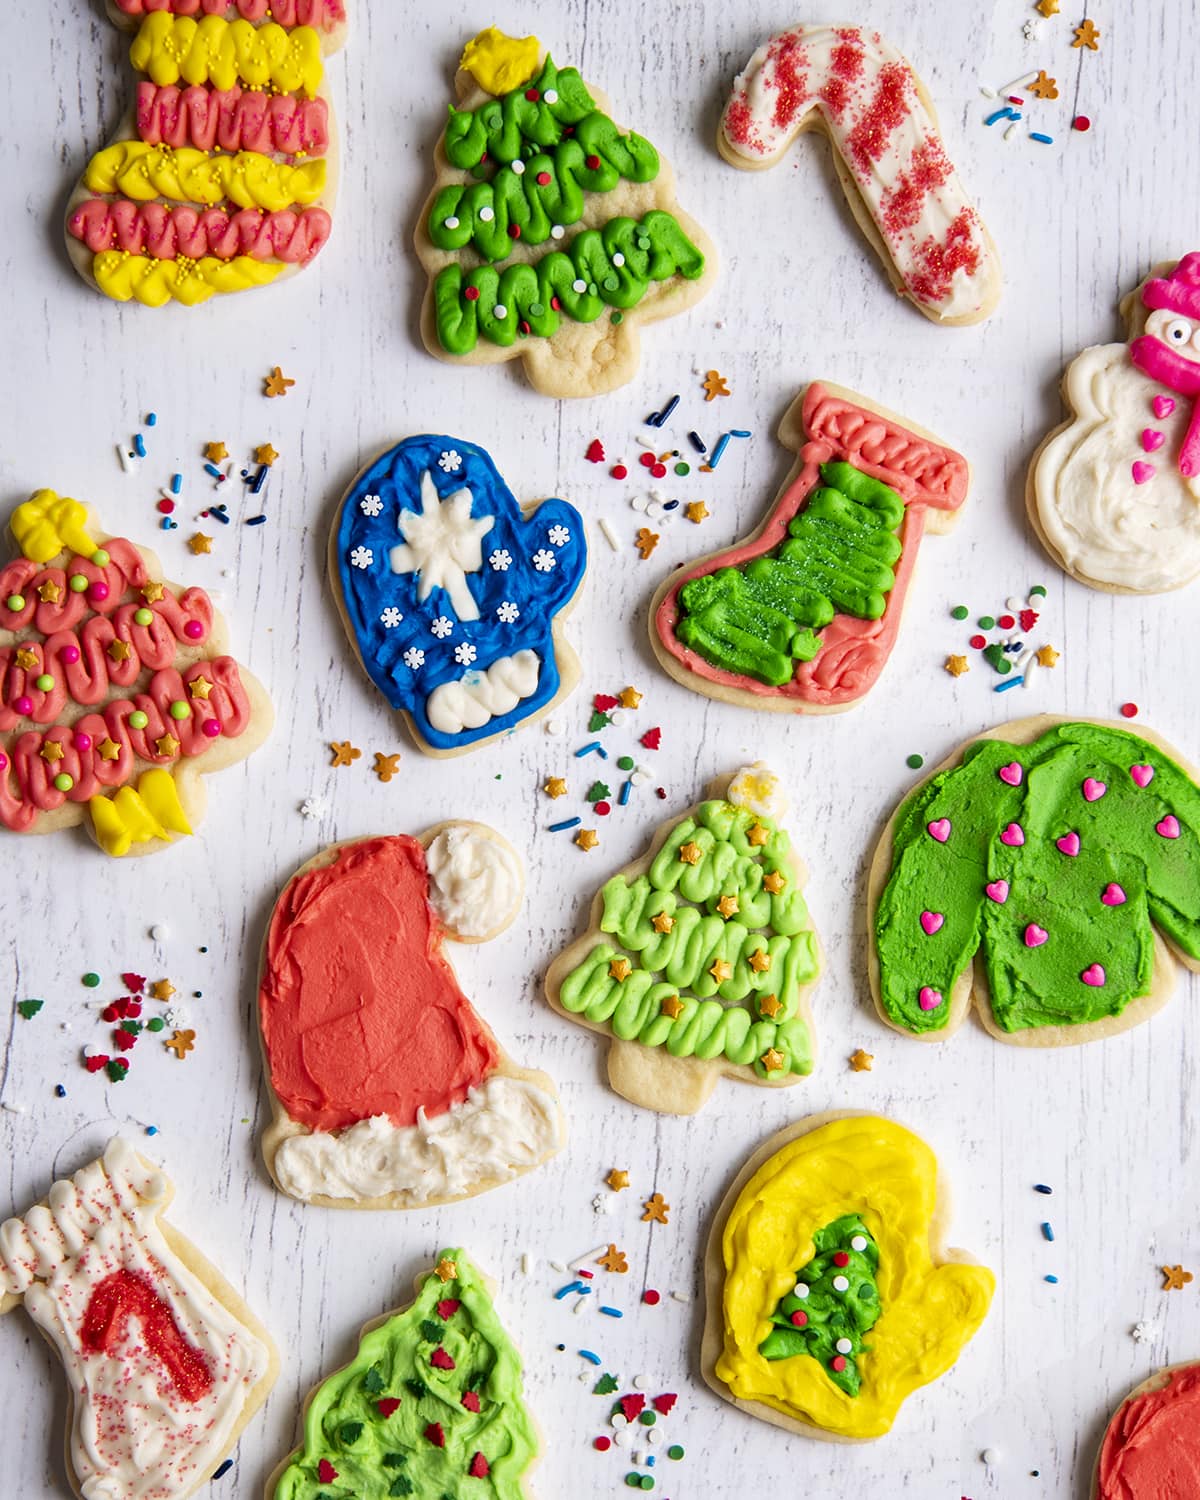 An overhead photo of several different decorated and frosted sugar cookies, Christmas trees, mittens, candy canes, and stockings.